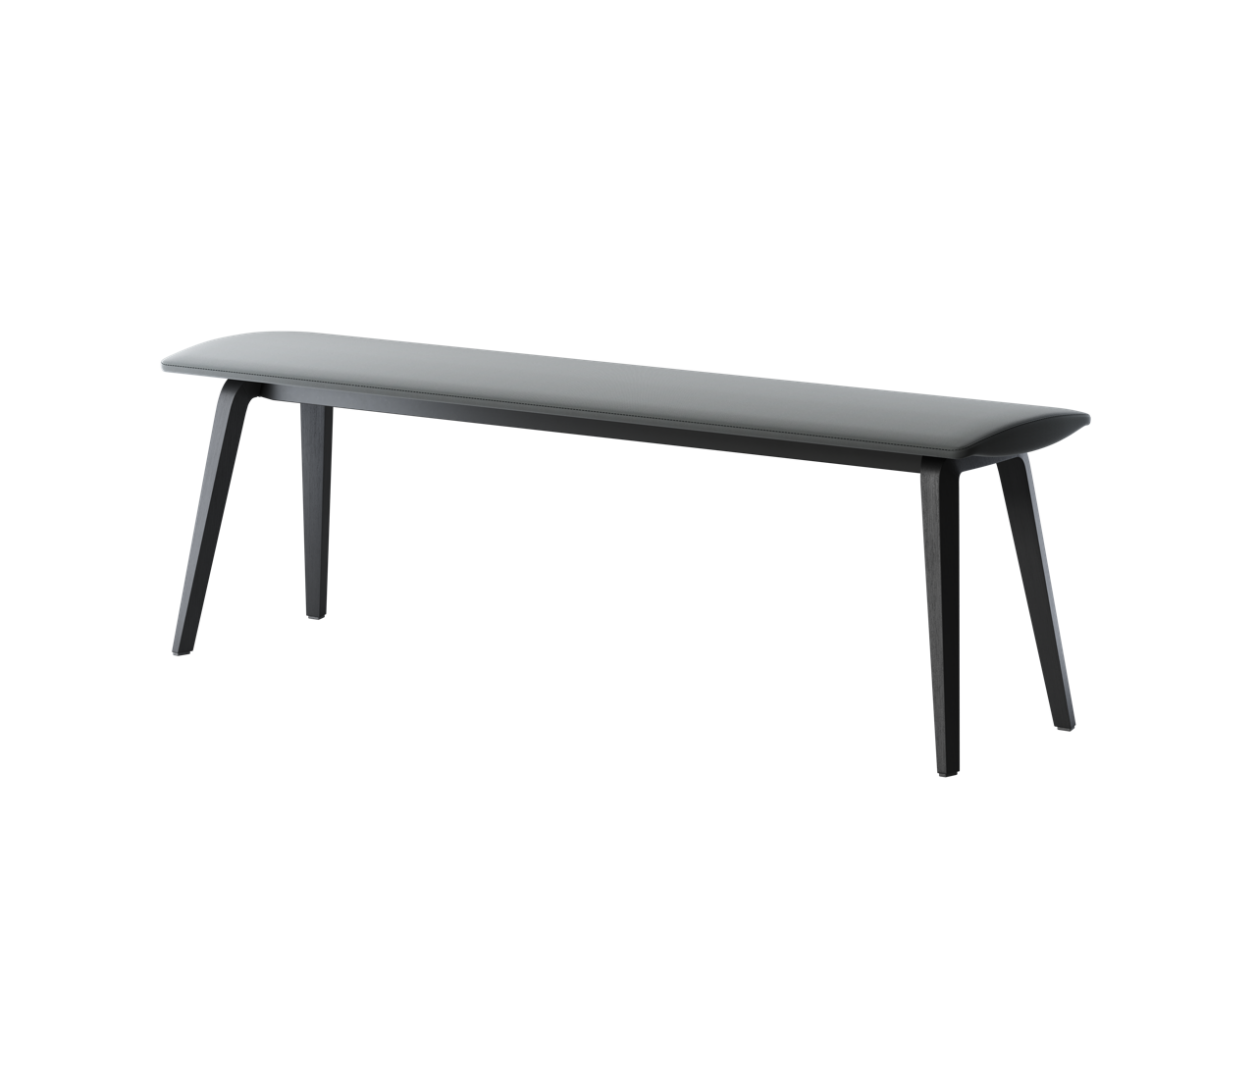 OCEE&FOUR – Stools & Benches – Share Bench – Packshot Image(38) Large